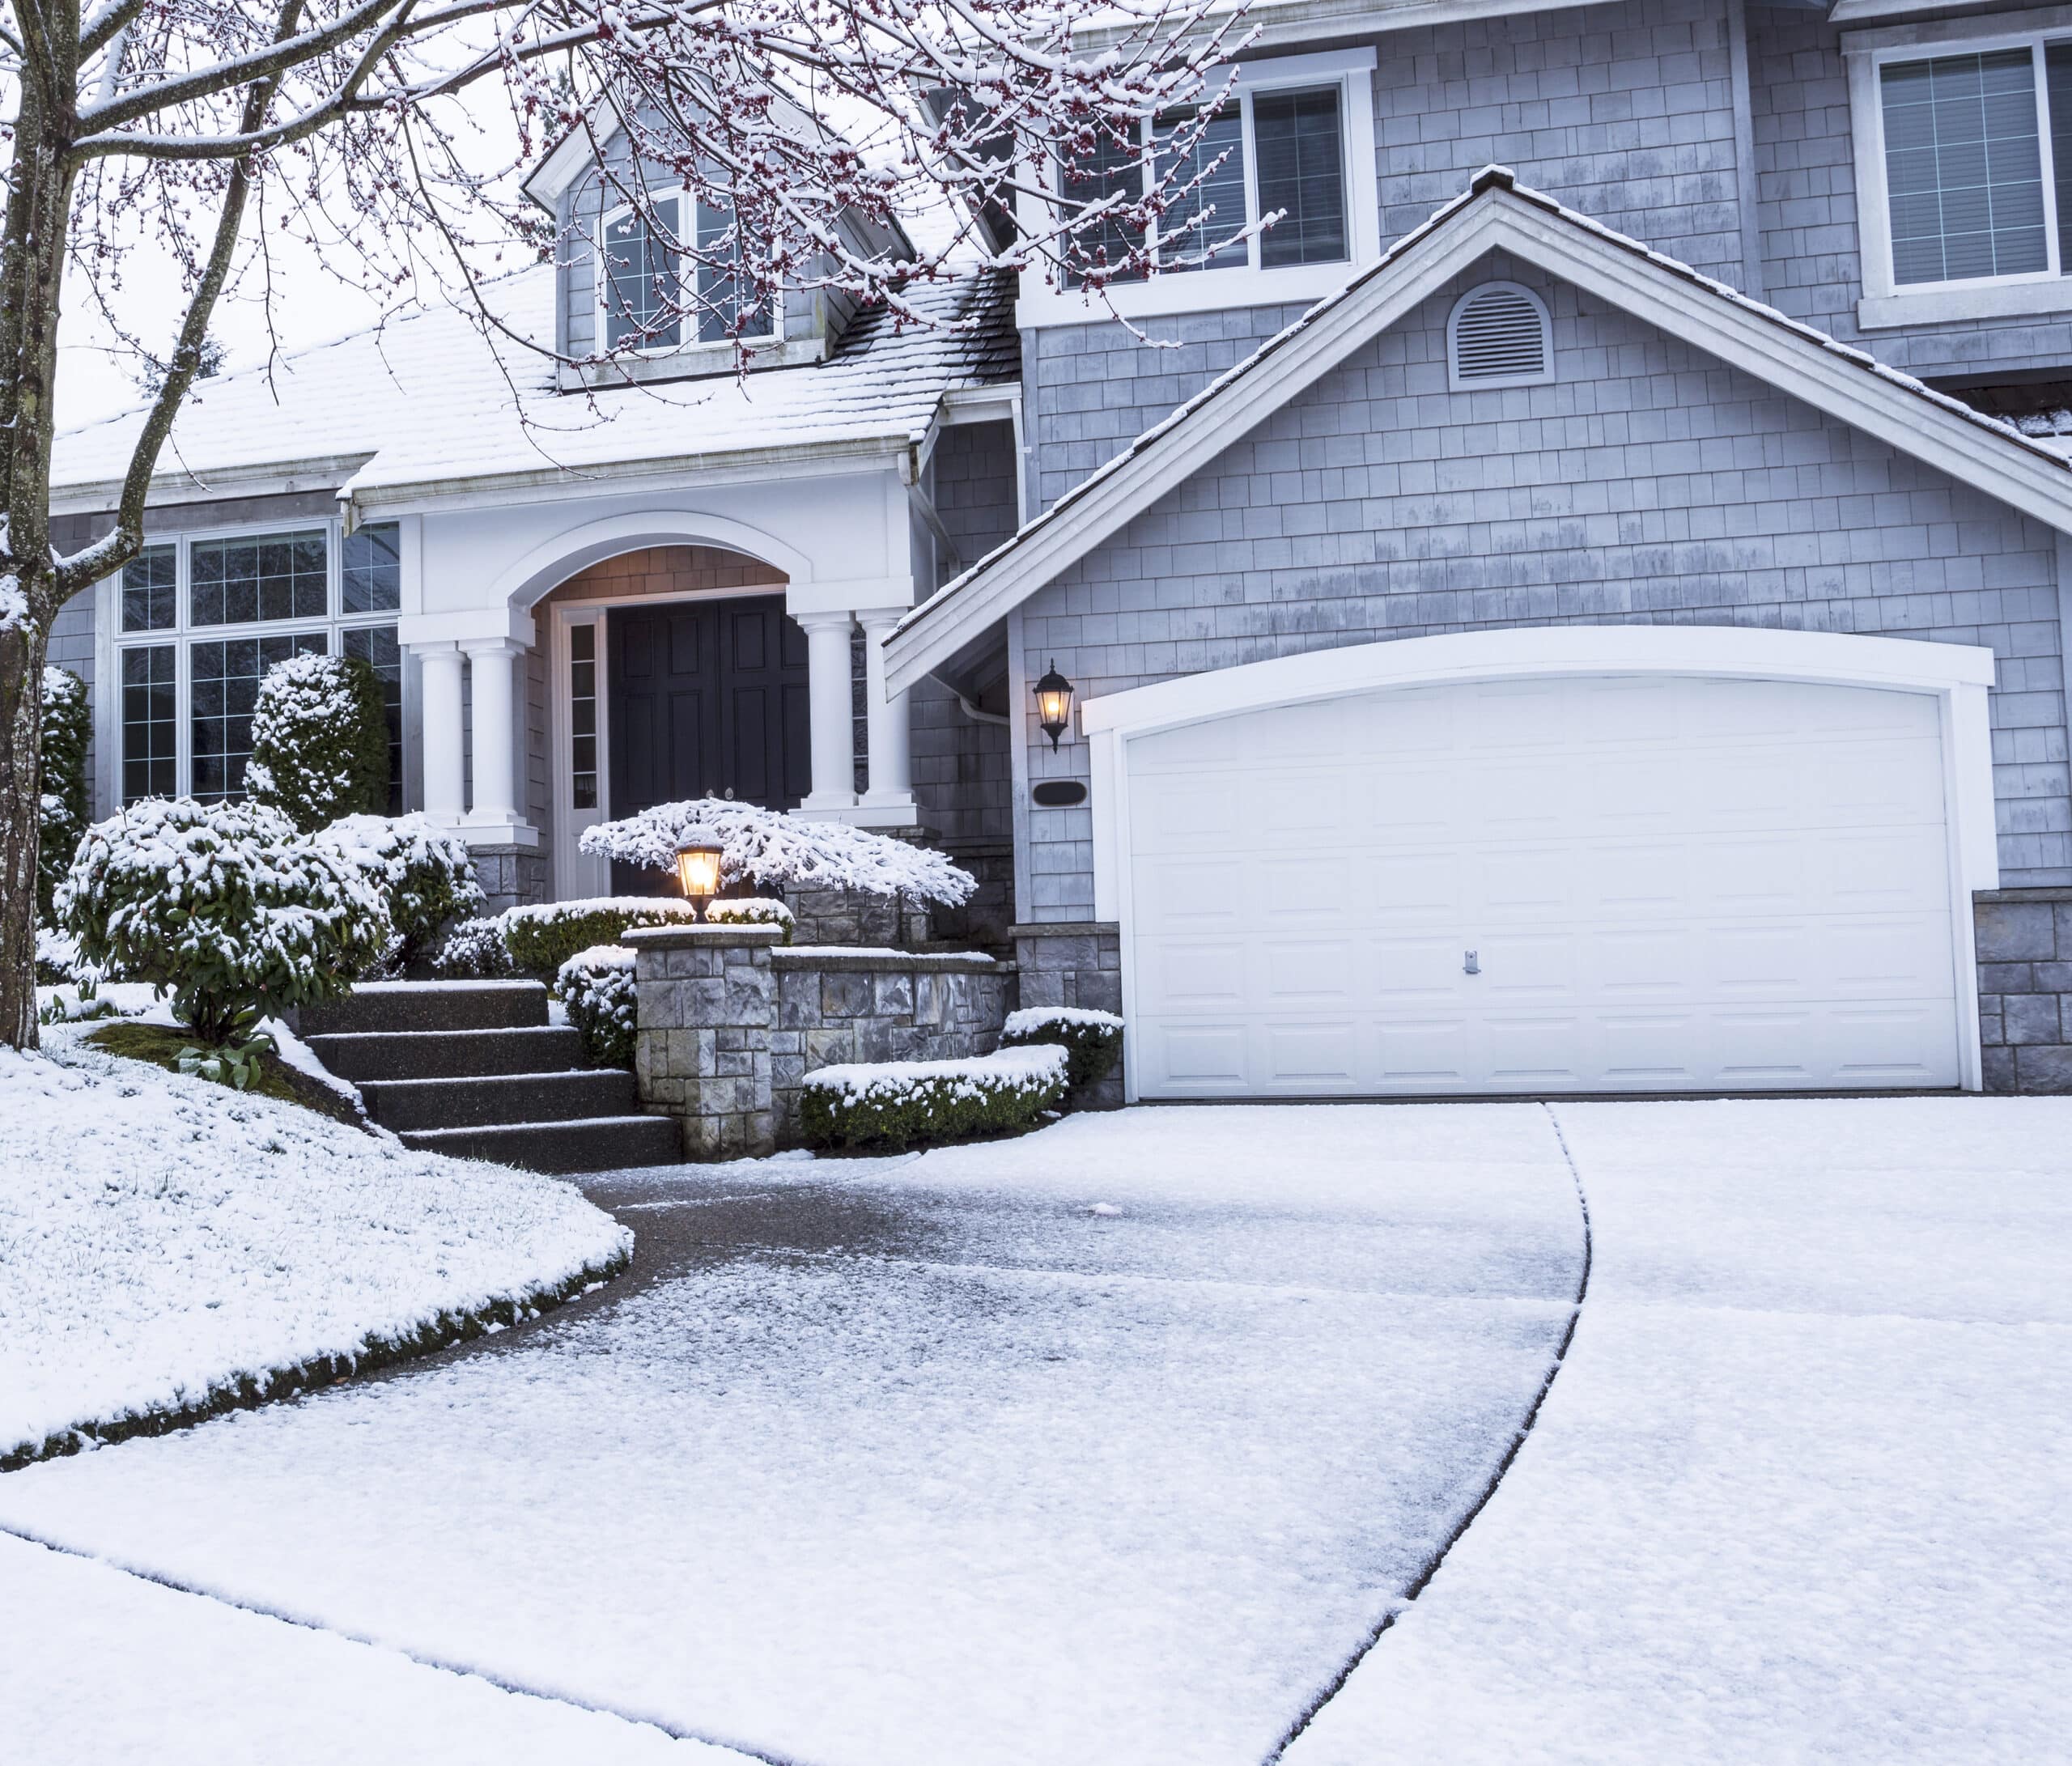 4 Ways To Winterize Your Home in Utah